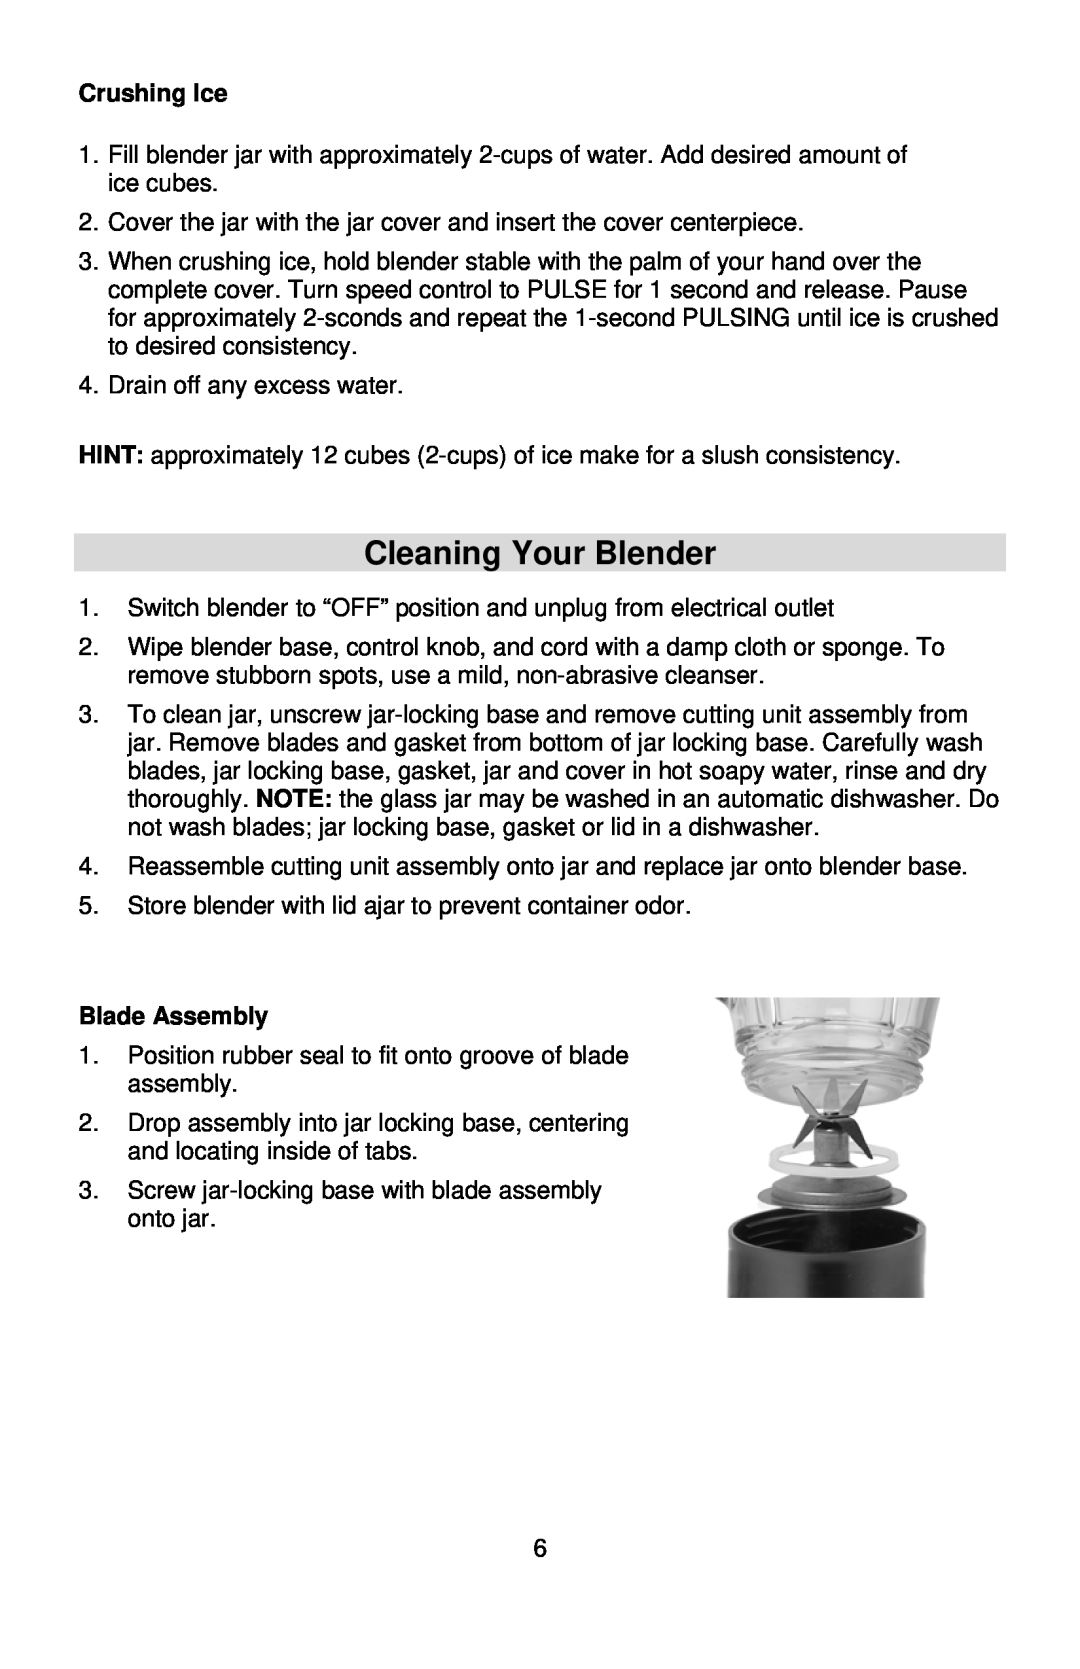 West Bend instruction manual Cleaning Your Blender, Crushing Ice, Blade Assembly 